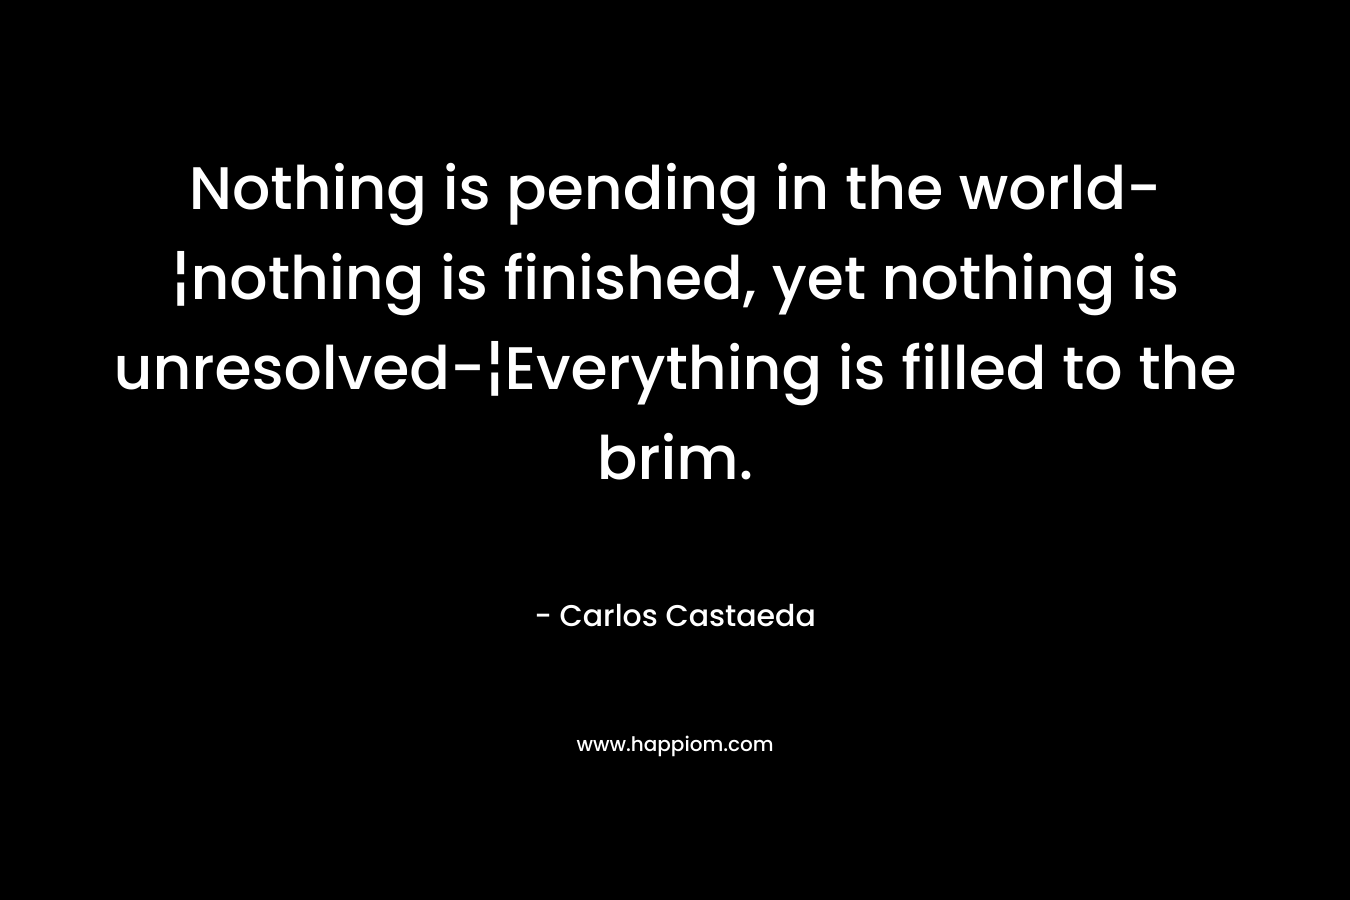 Nothing is pending in the world-¦nothing is finished, yet nothing is unresolved-¦Everything is filled to the brim. – Carlos Castaeda